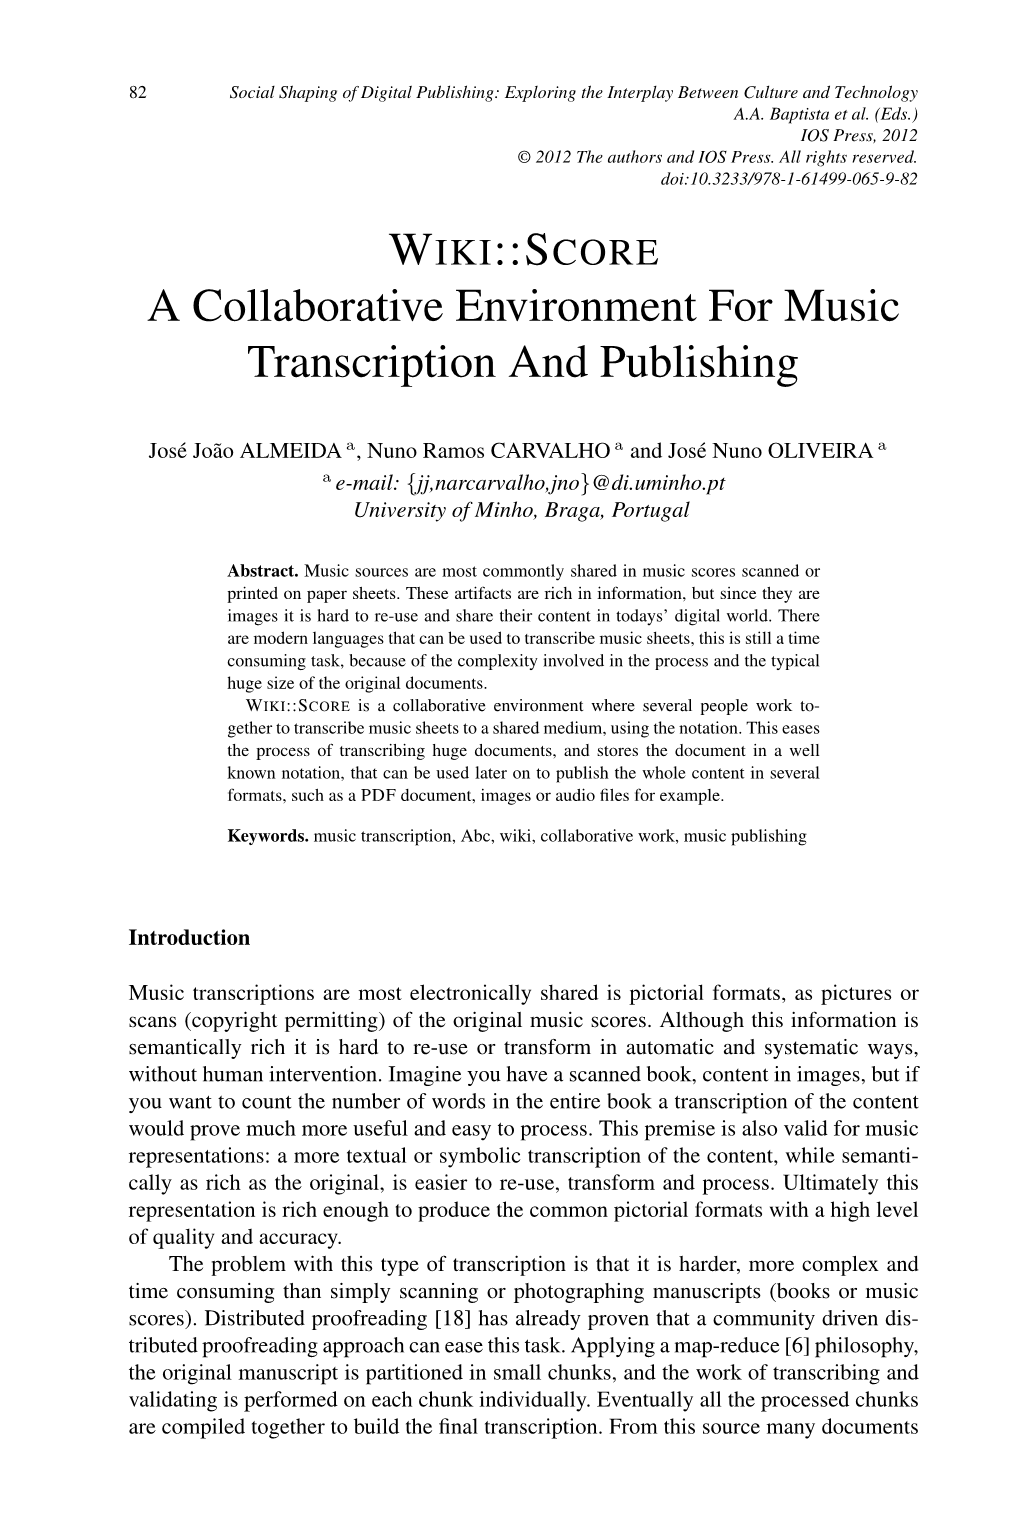 A Collaborative Environment for Music Transcription and Publishing